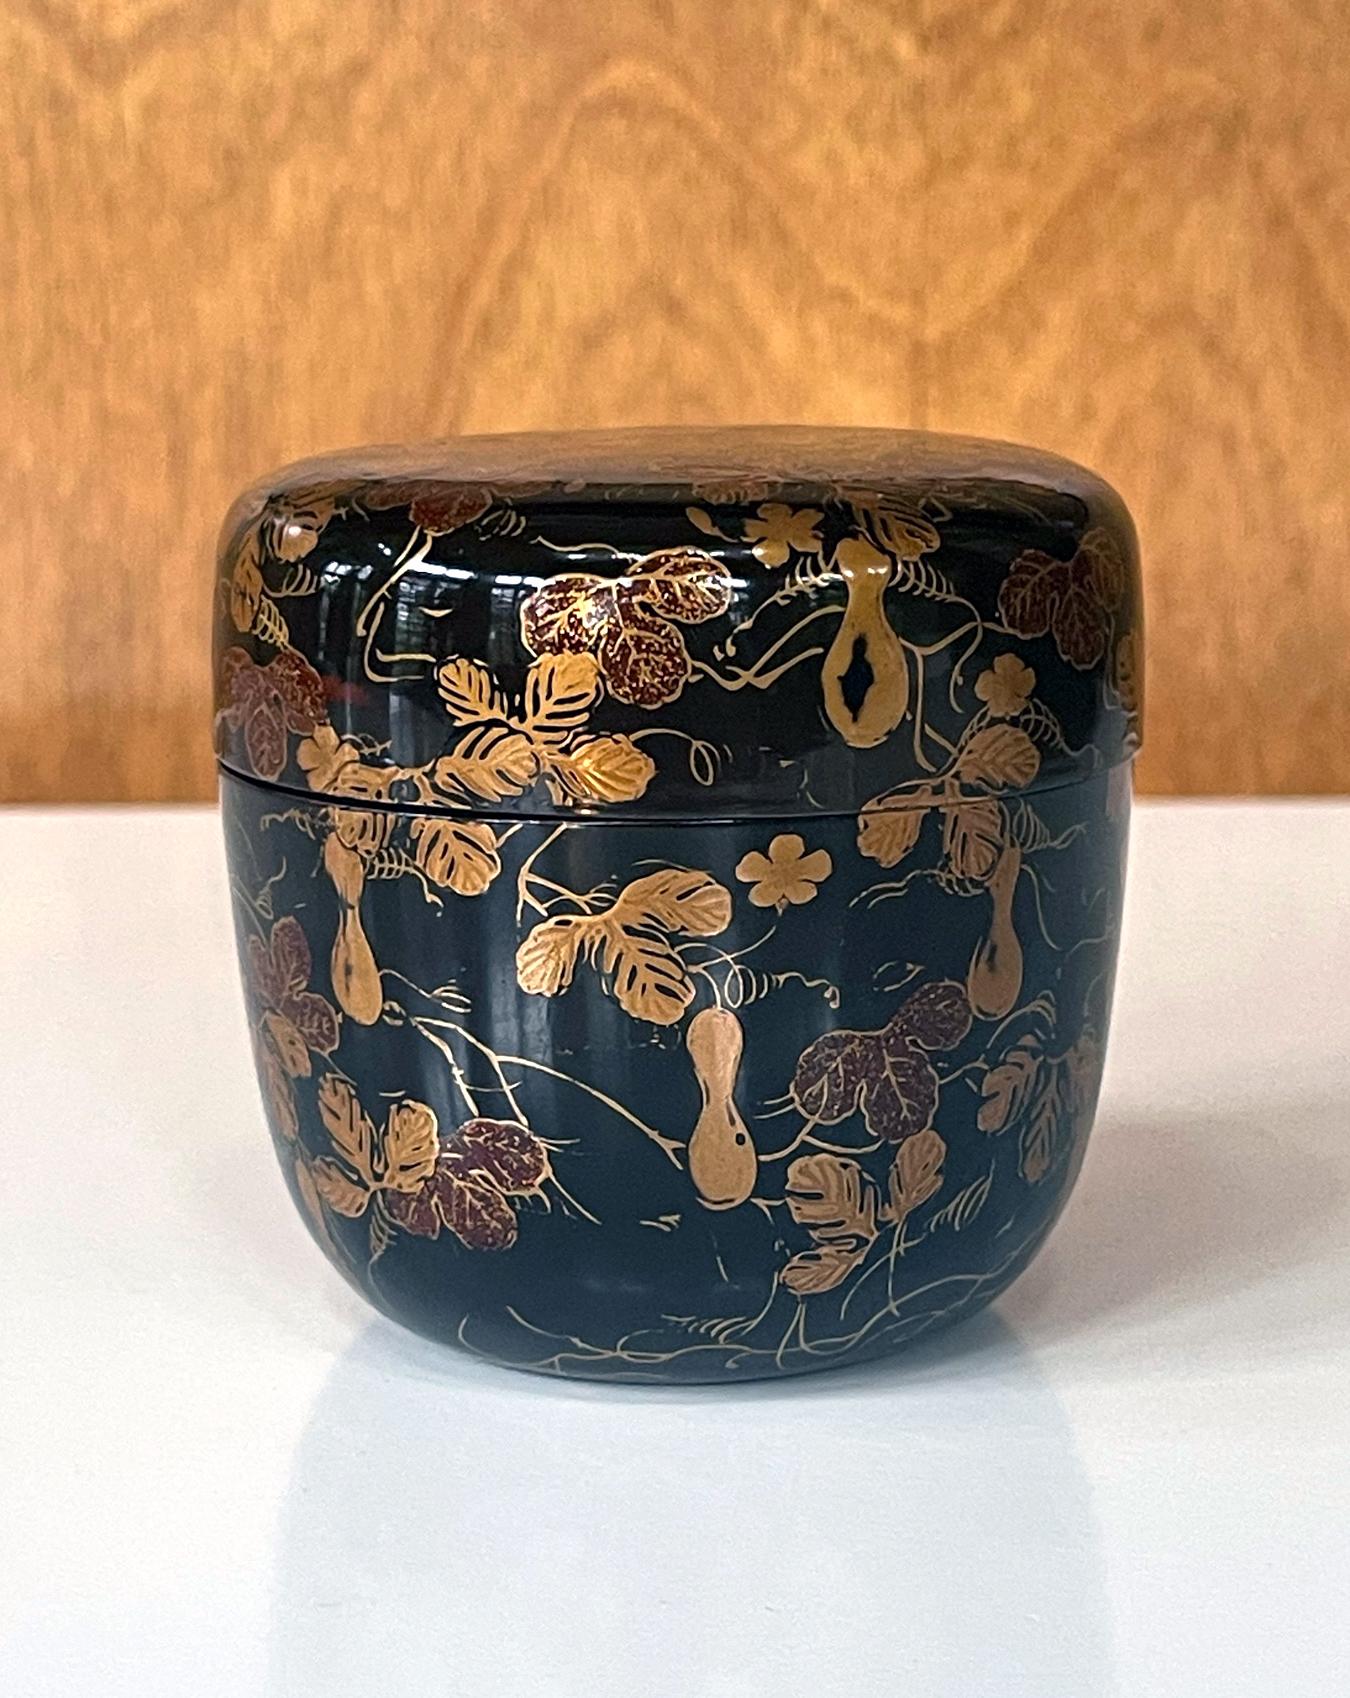 A Japanese lacquered tea caddy (known as Natsume) with fine Maki-e decoration circa 18-19th century Edo to Meiji period. The large-sized natsume with a fitted lid, sometimes also called usuchaki, was traditionally used to store tea powder for